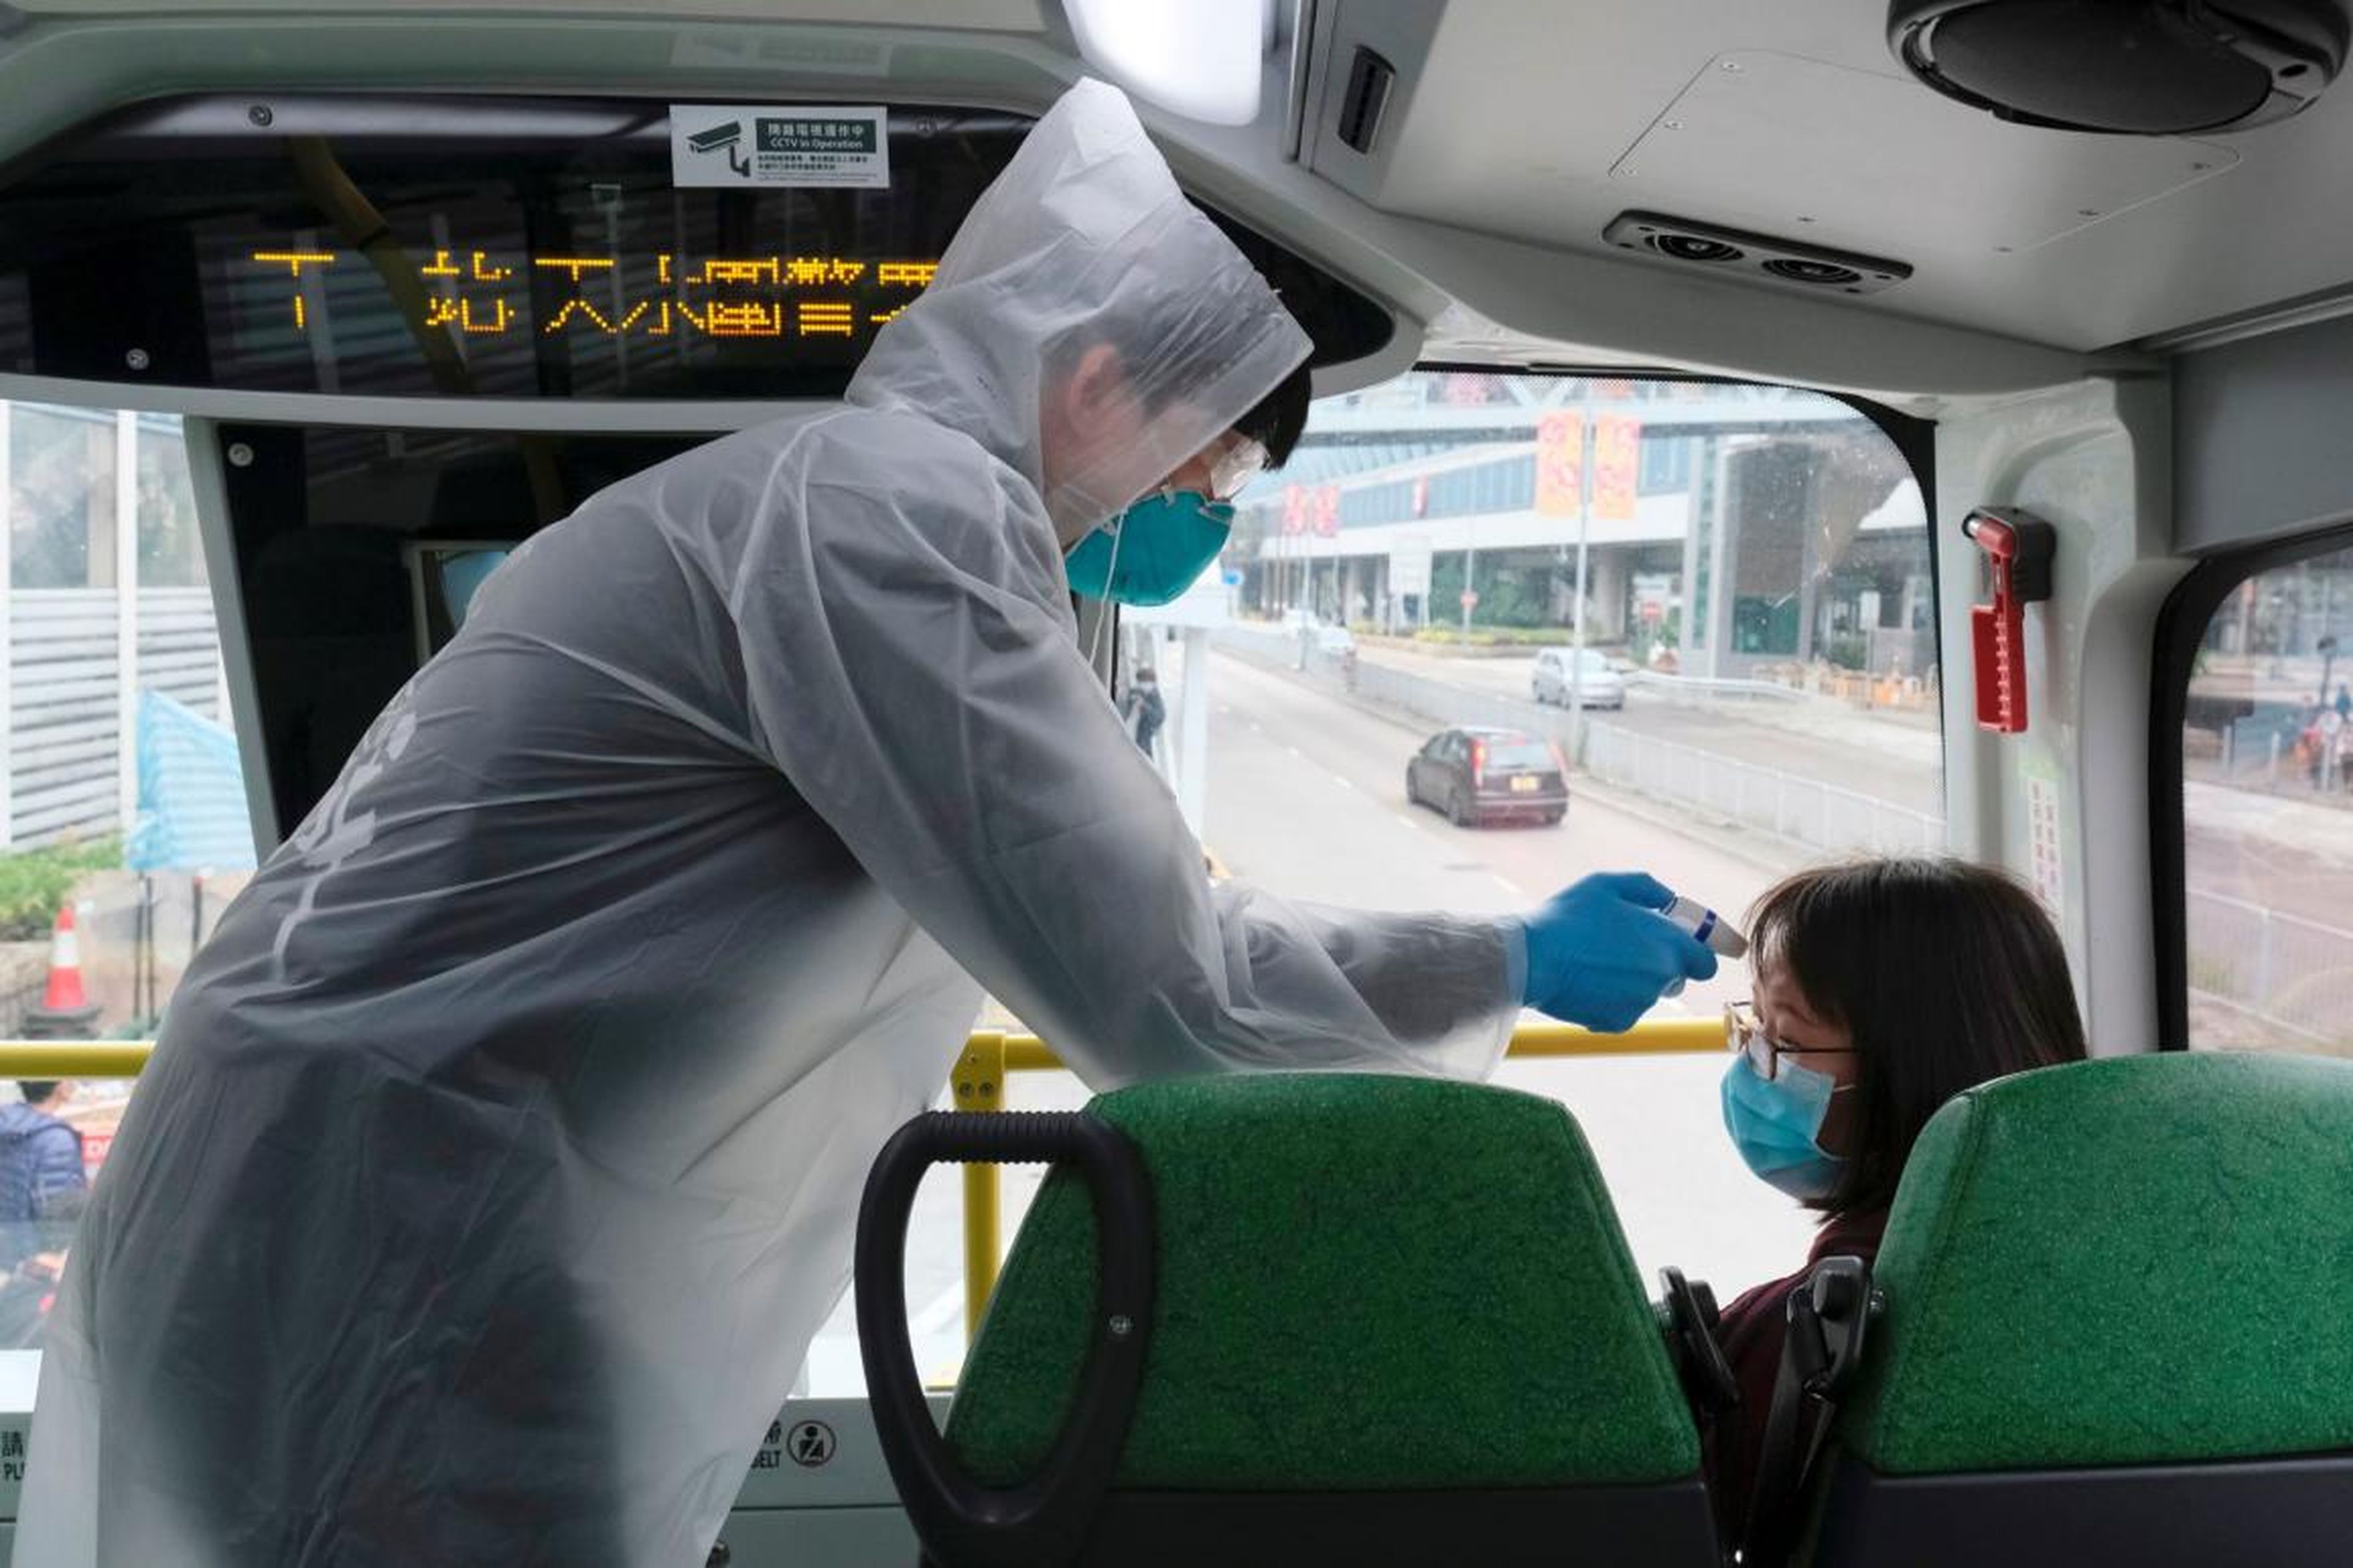 A resident wearing mask and raincoat takes the temperature of passenger at a bus stop at Tin Shui Wai, China, February 4, 2020.